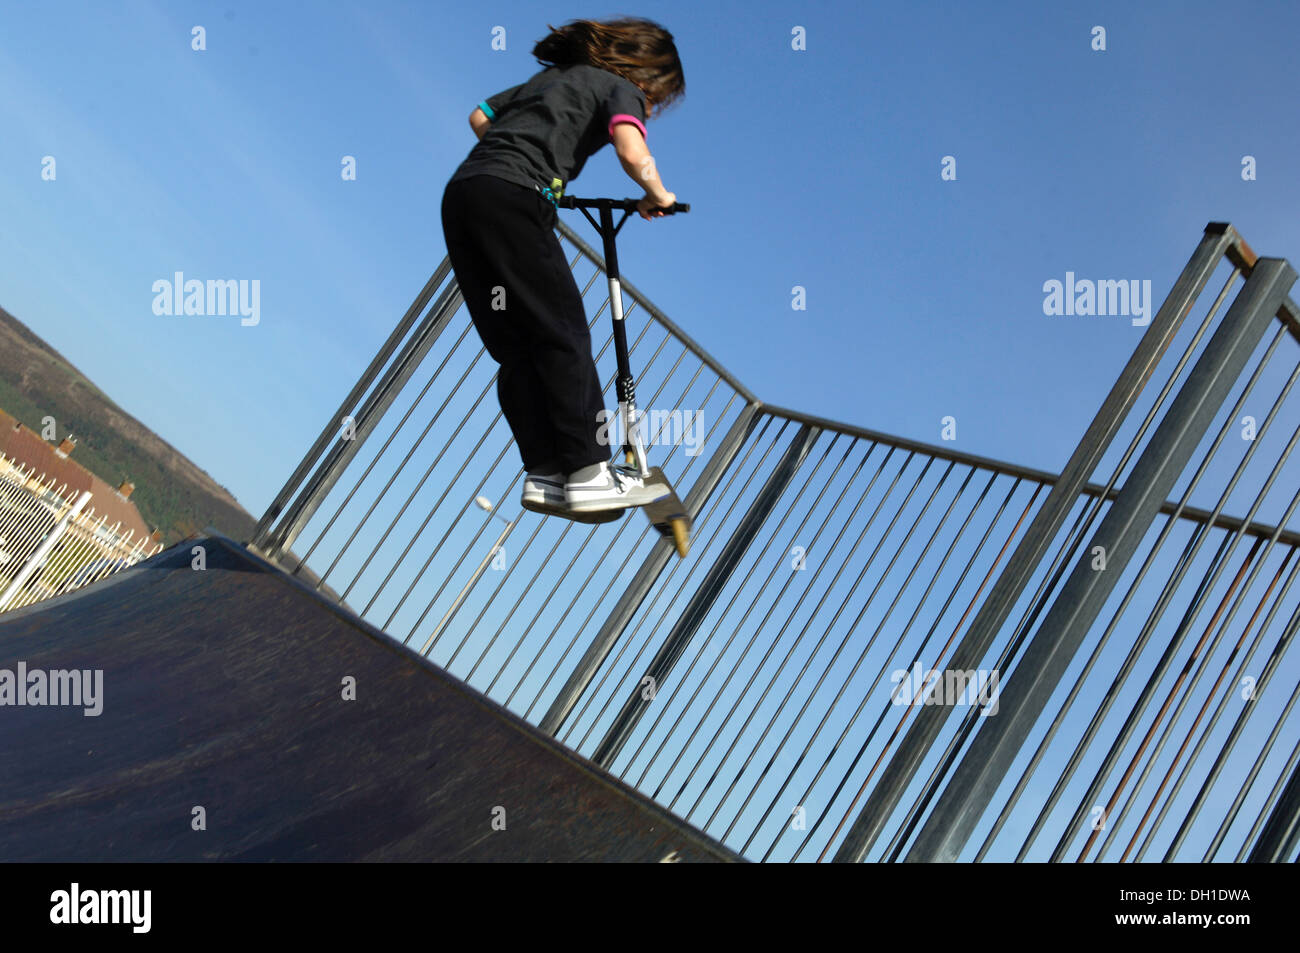 Young Boy riding a scooter, flying off a skate ramp in a Port Tabot skate park. Stock Photo